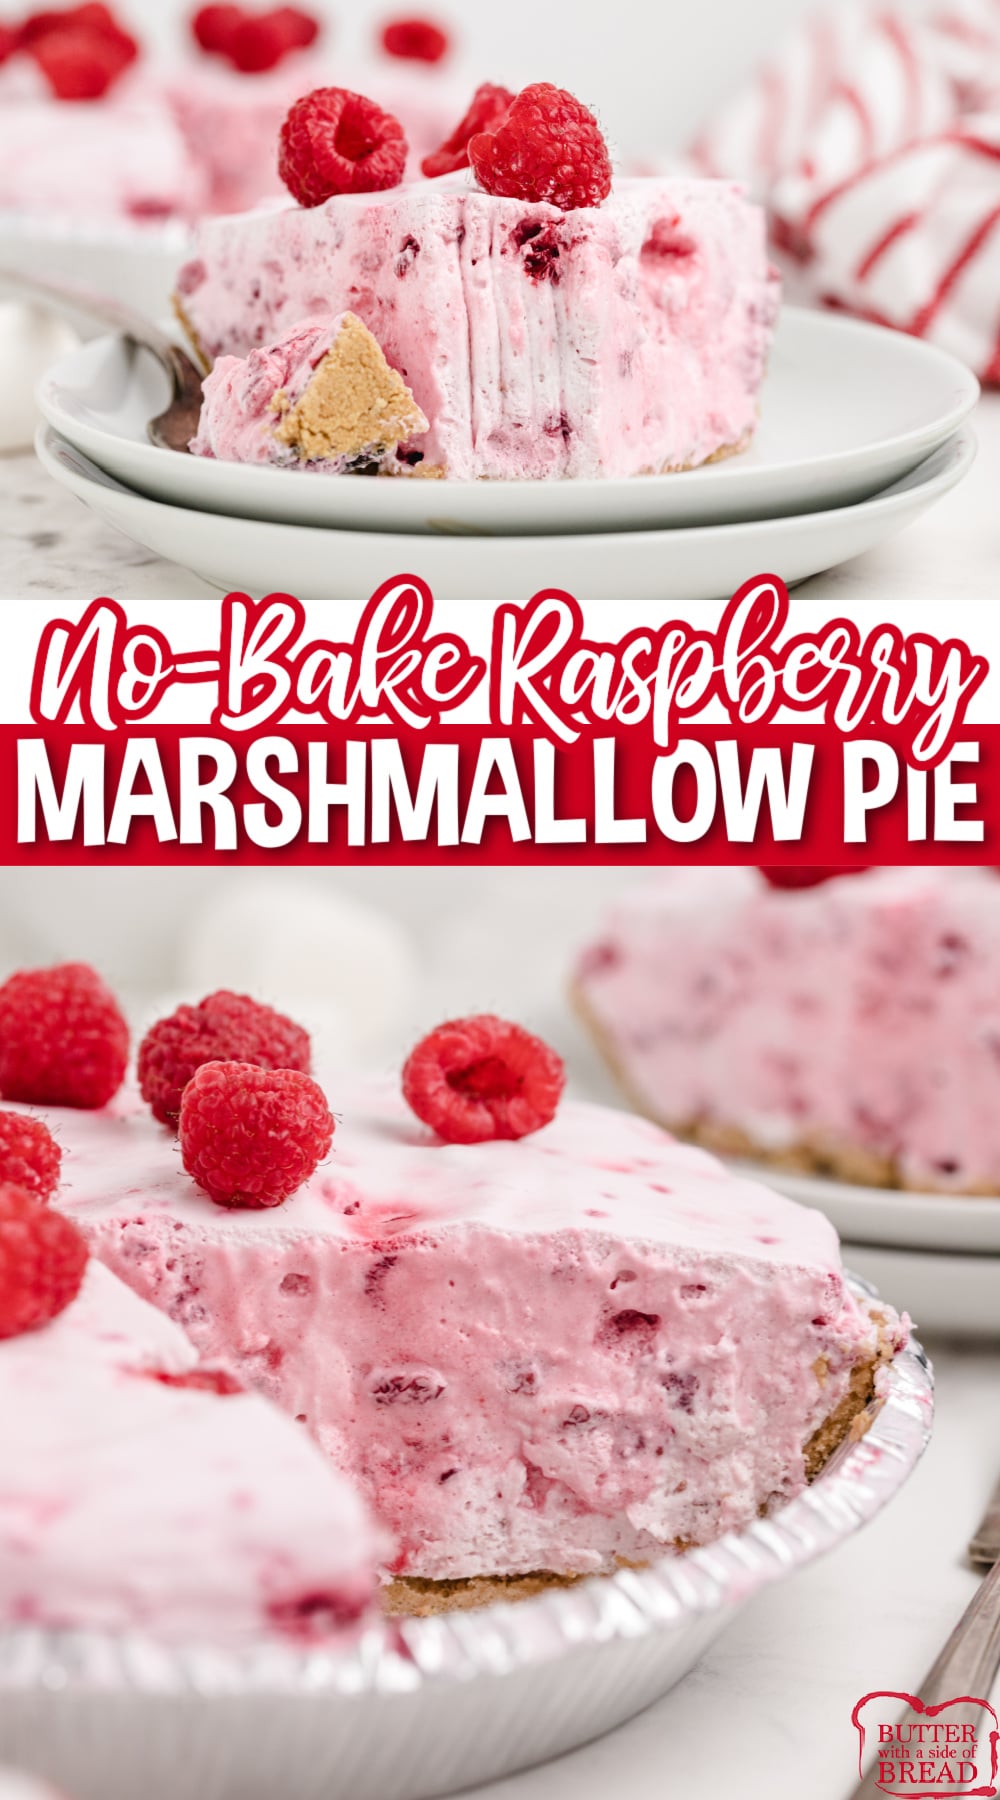 No Bake Raspberry Marshmallow Pie made with 5 ingredients in less than 5 minutes. This no bake dessert is so easy to make!